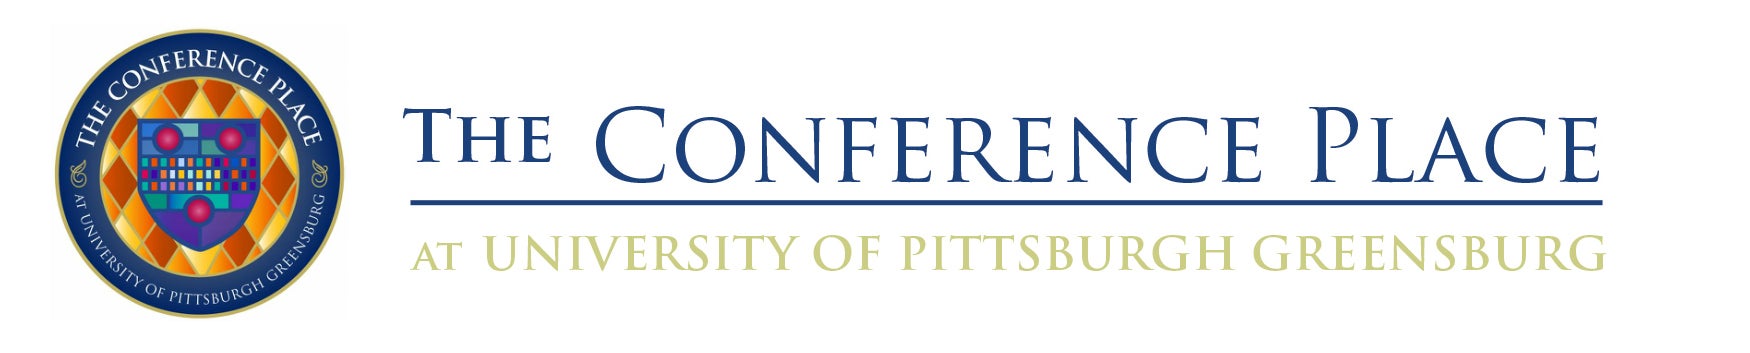 The Conference Place at University of Pittsburgh at Greensburg logo